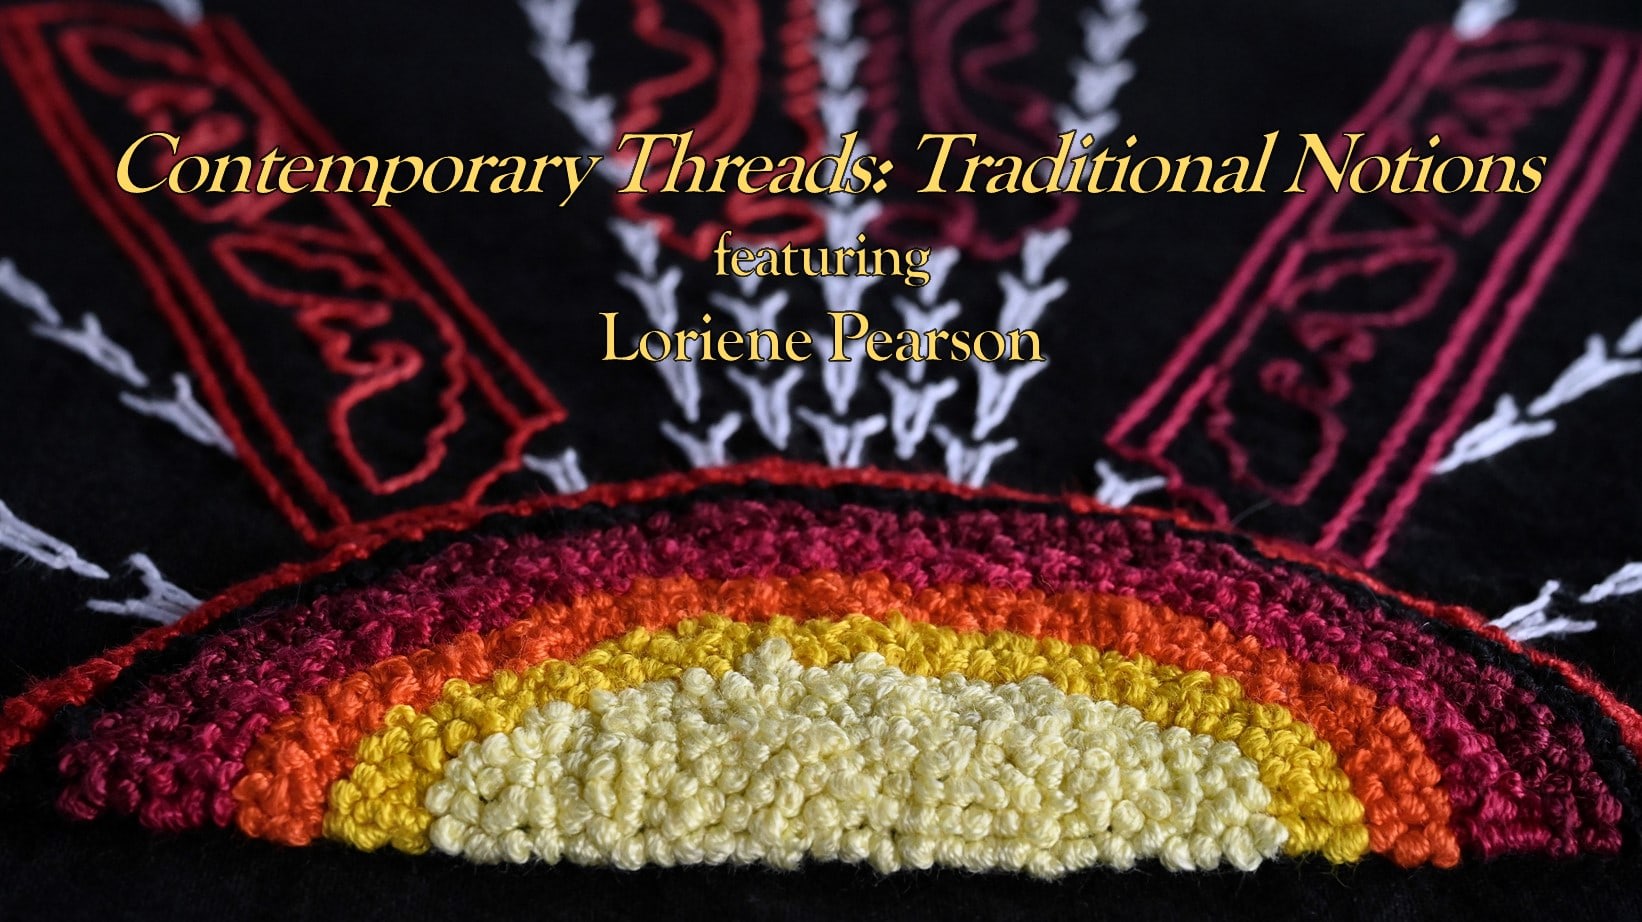 Contemporary Threads: Traditional Notions - Loriene Pearson - Viewing Room - Indian Arts and Crafts Board Online Exhibits Viewing Room